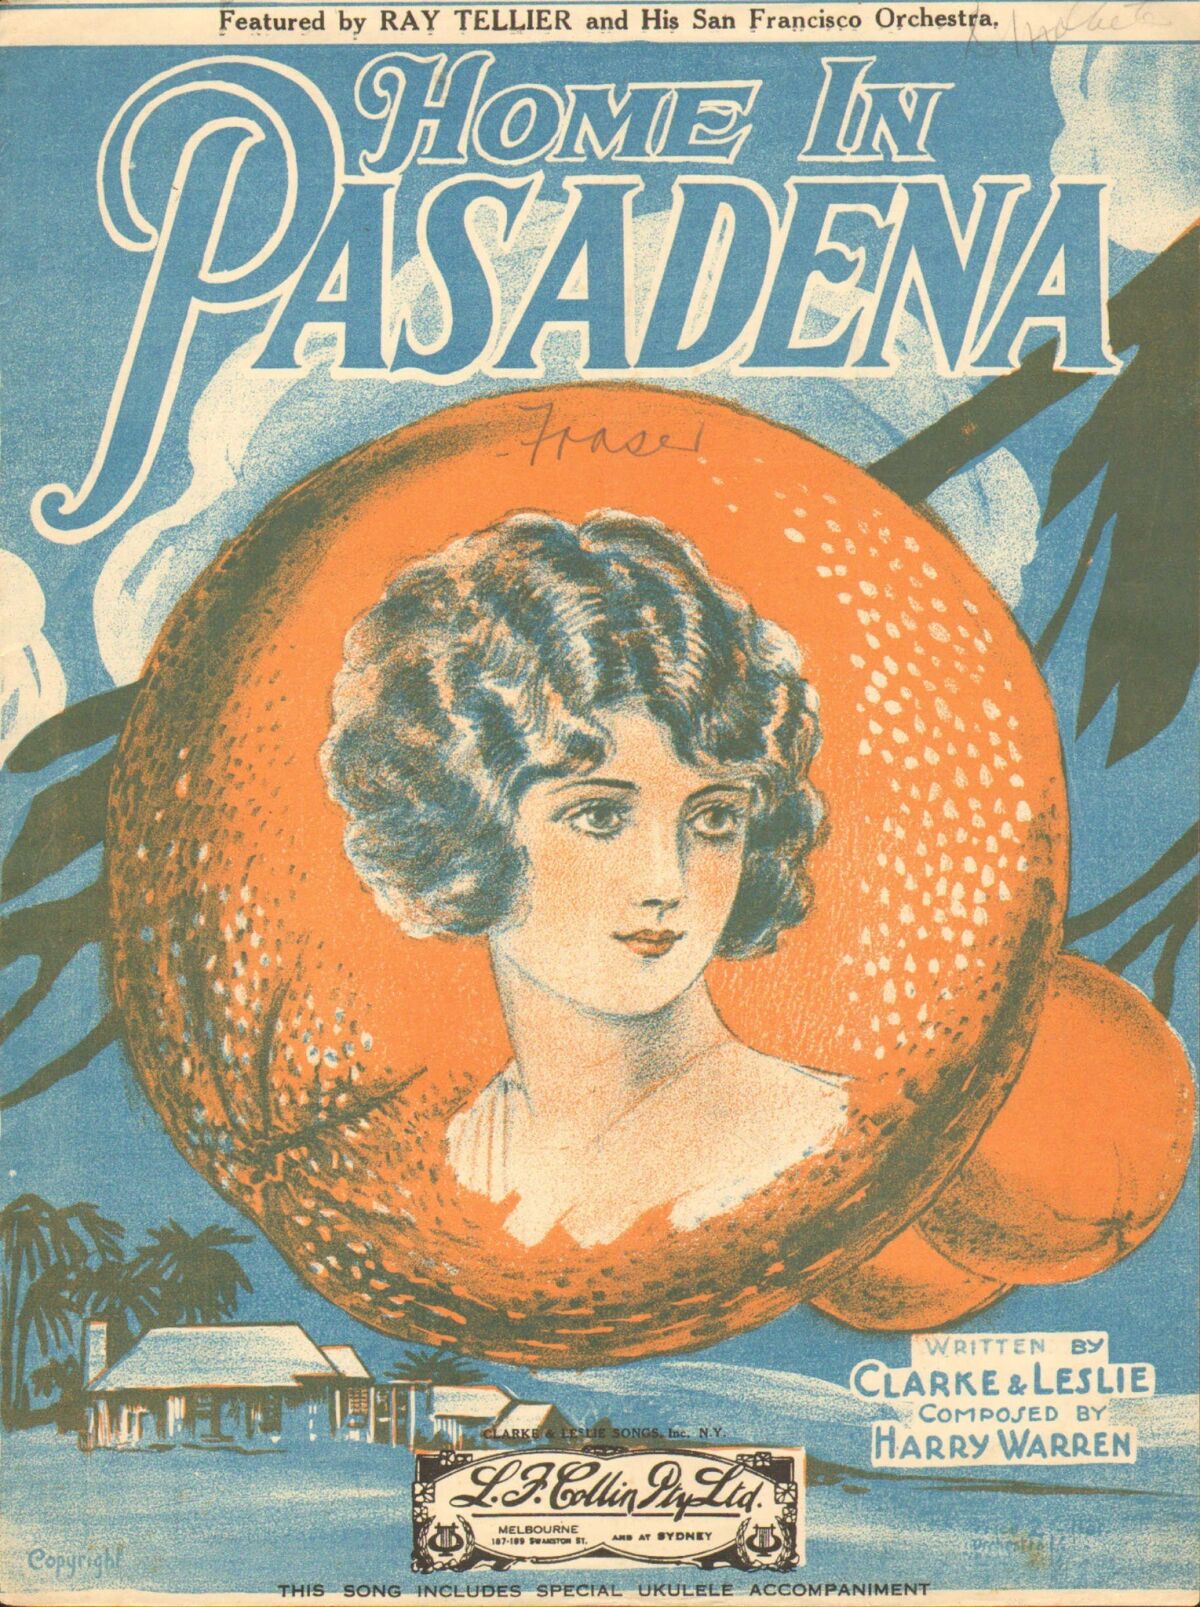 Sheet-music cover illustration shows a portrait of a 1920s-era woman on an orange.